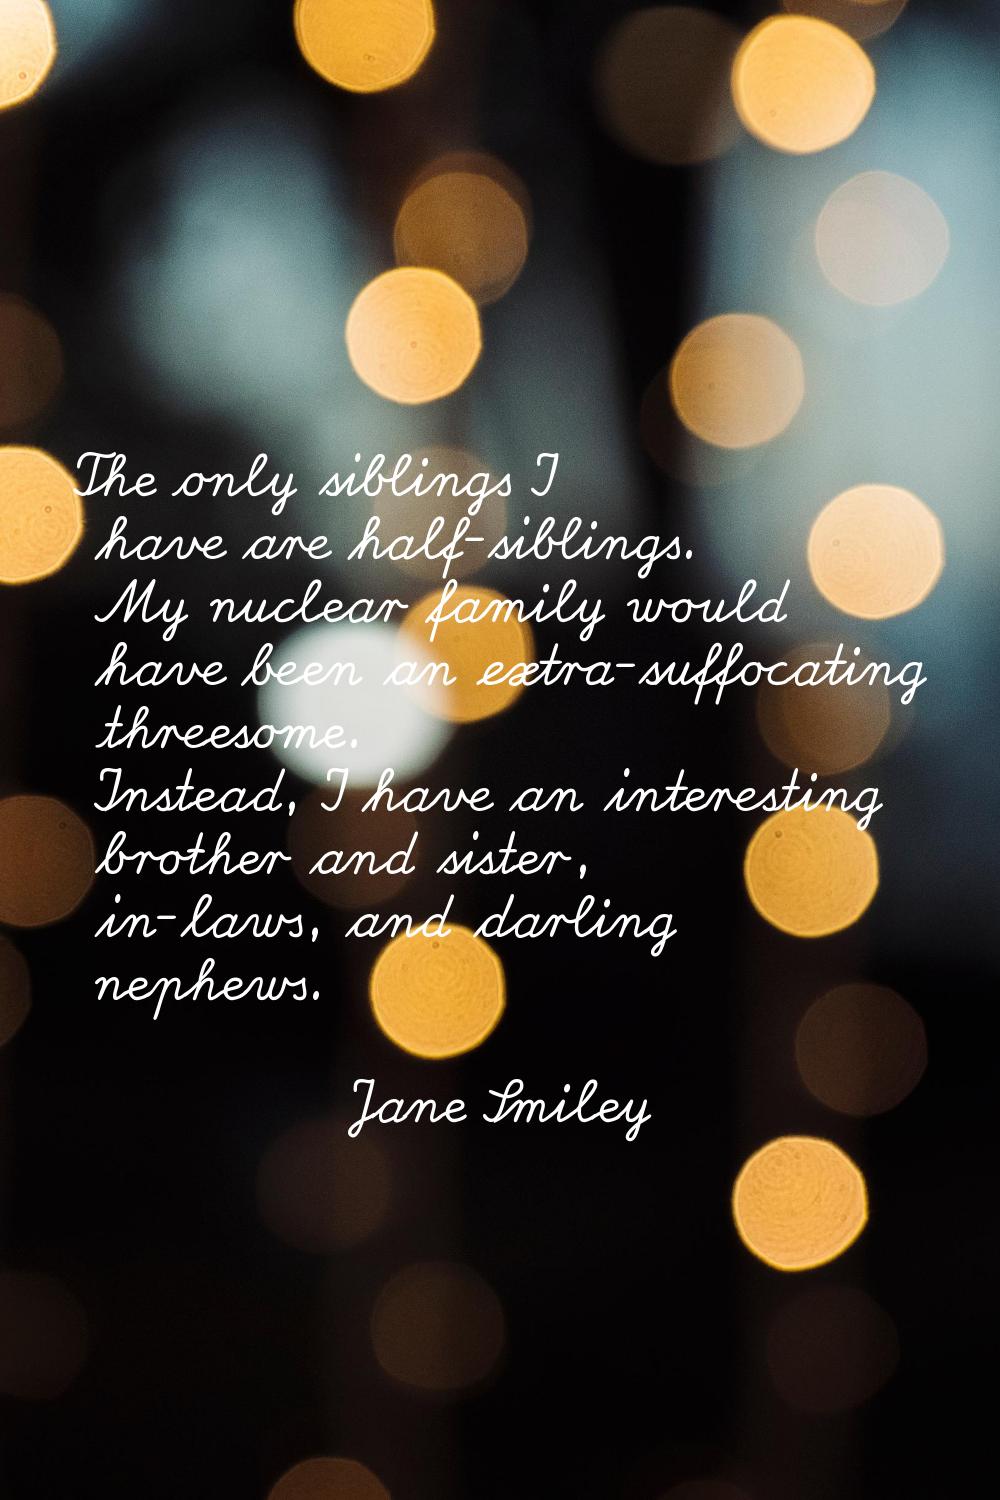 The only siblings I have are half-siblings. My nuclear family would have been an extra-suffocating 